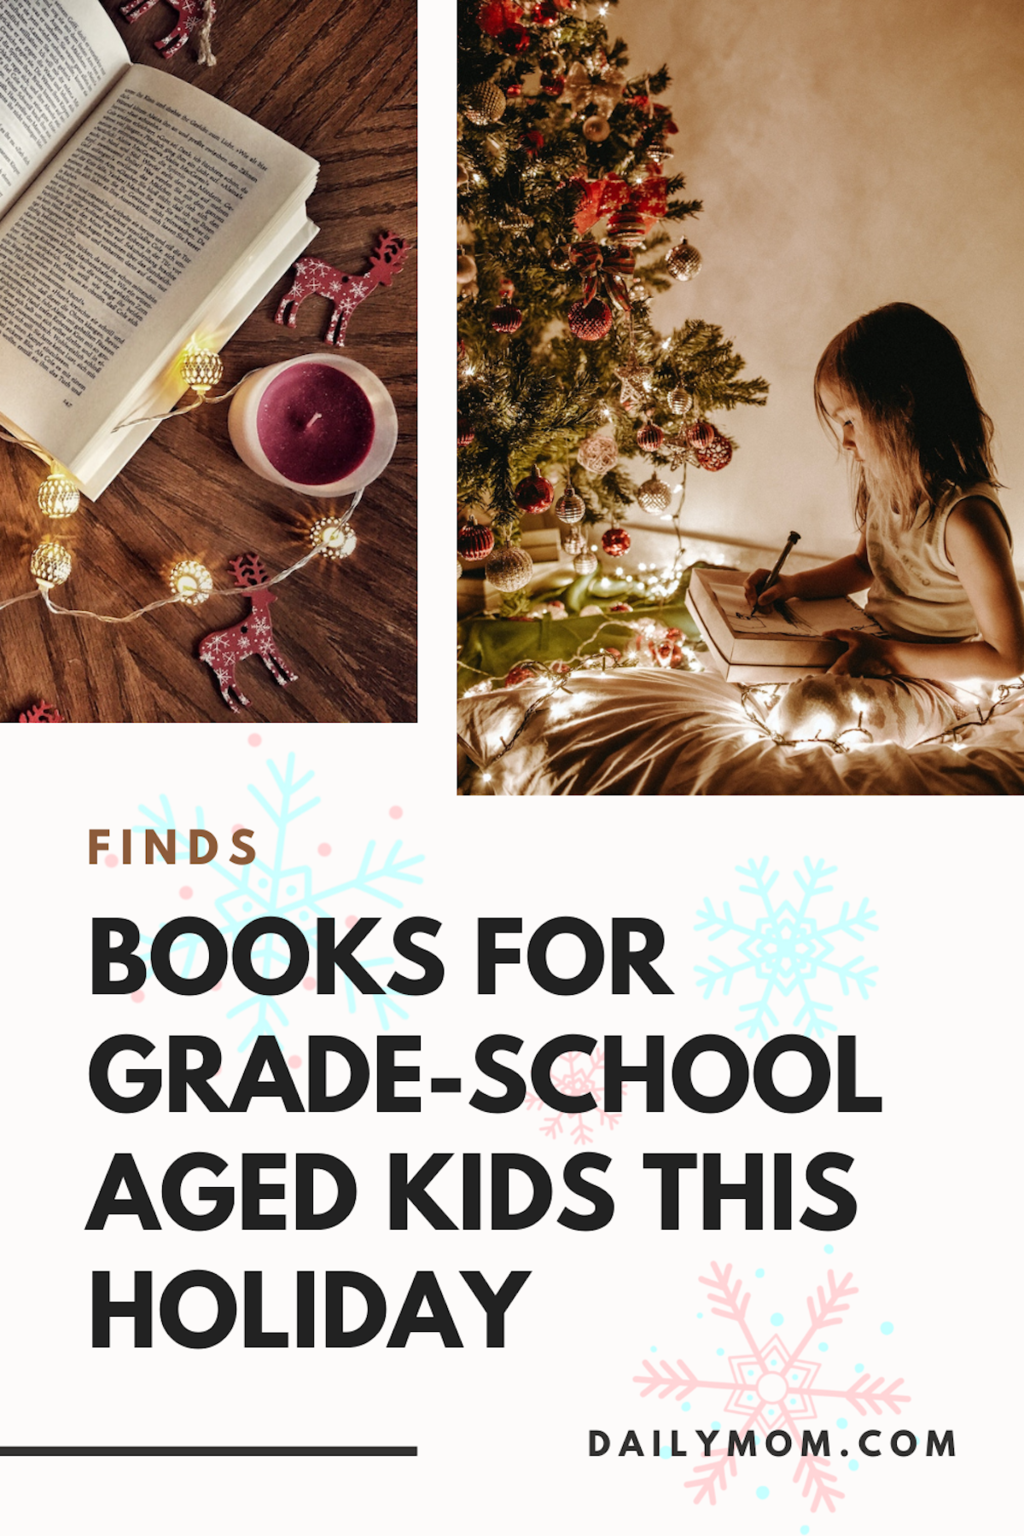 20 Winter Books For Kids That Grade School-Aged Children Will Love This Holiday